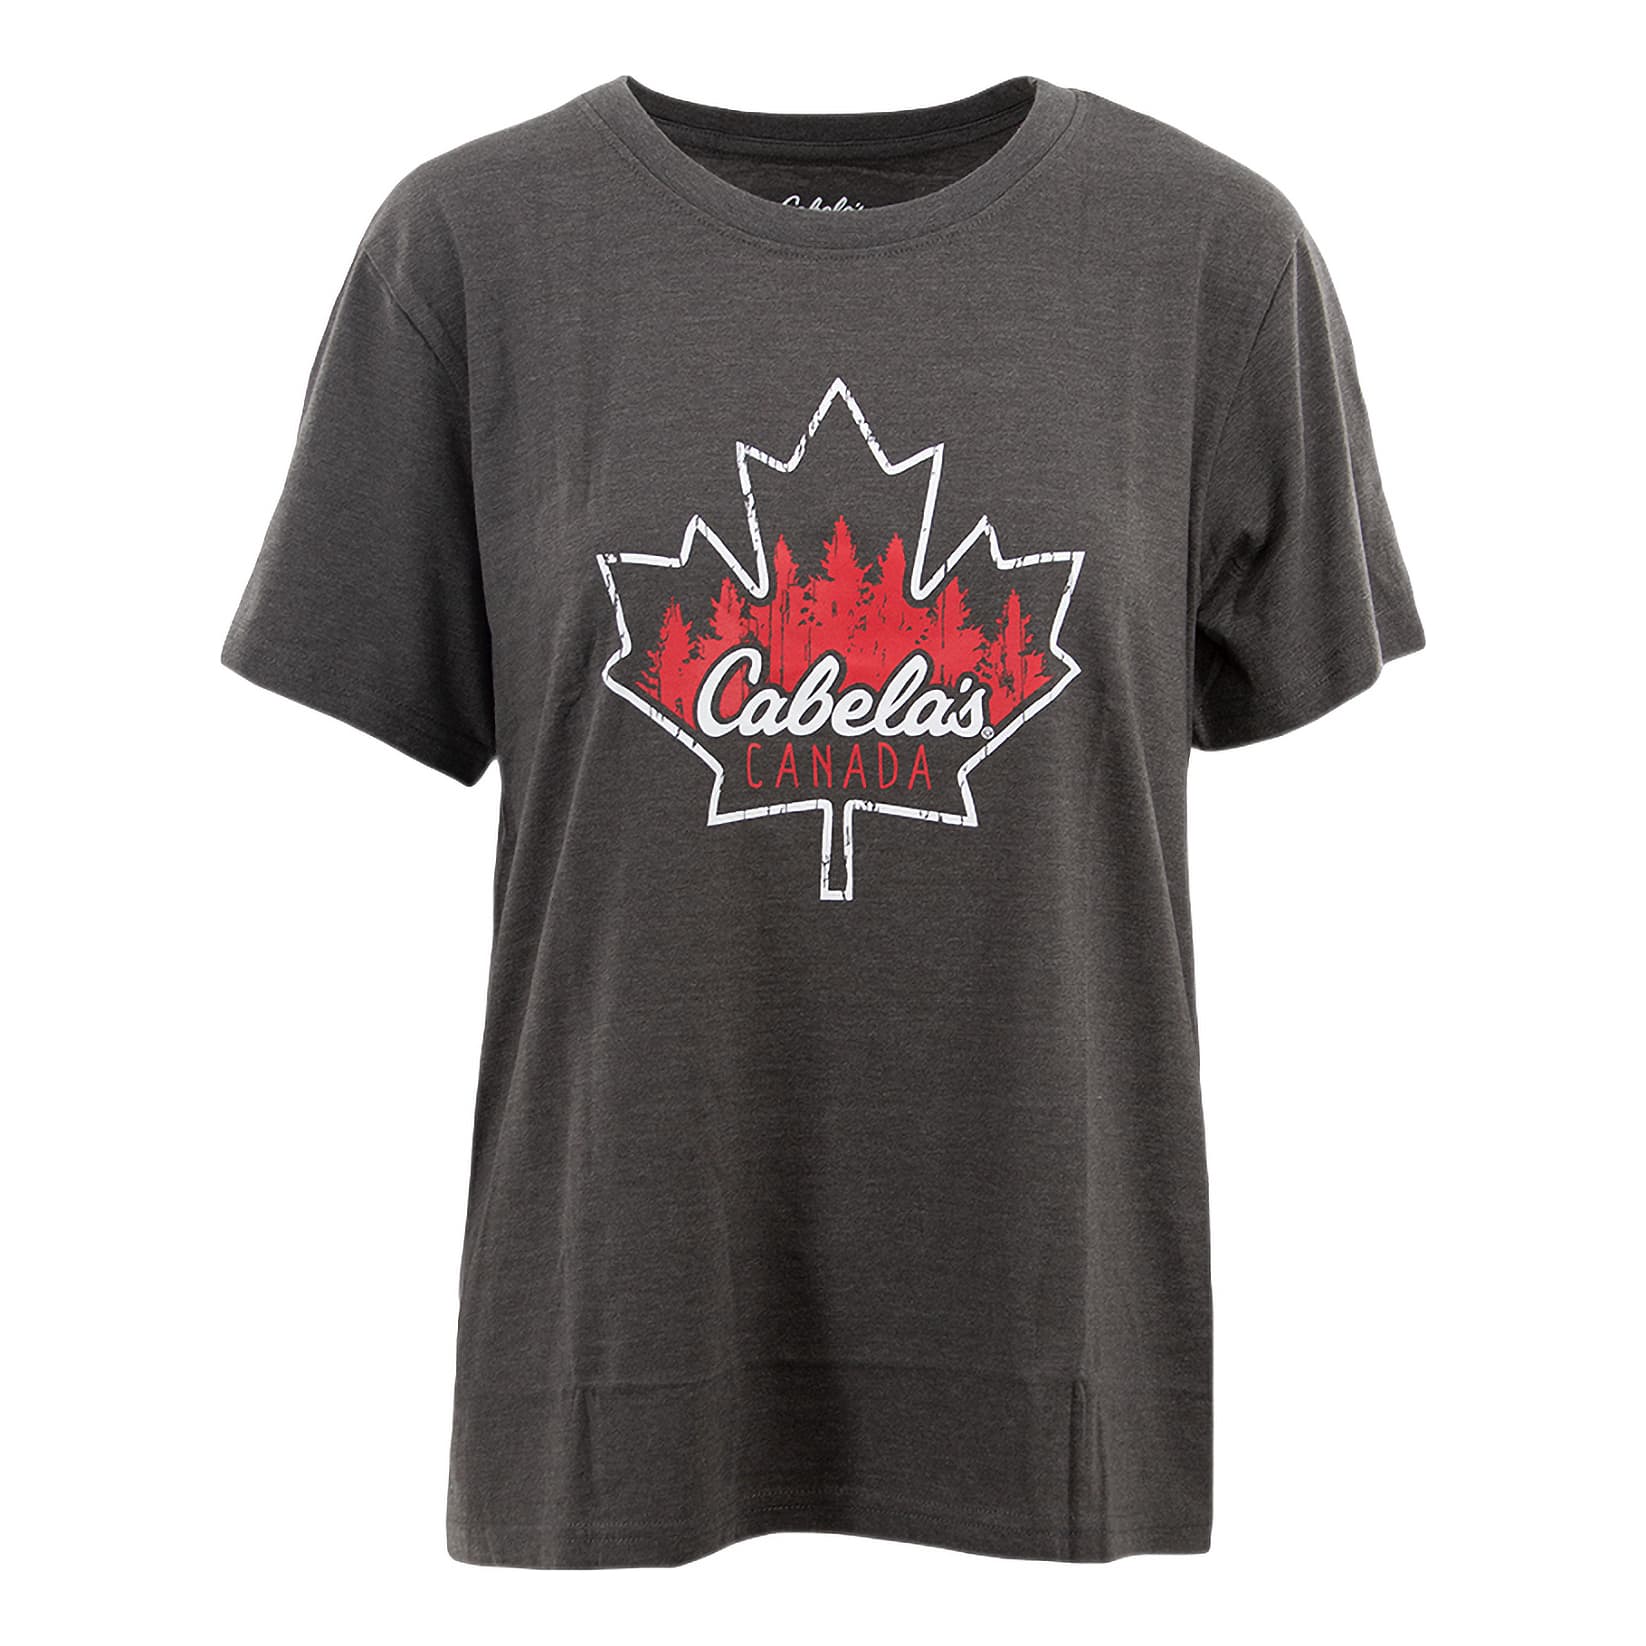 Cabela’s Women’s Canada Day Short-Sleeve T-Shirt - Charcoal Heather